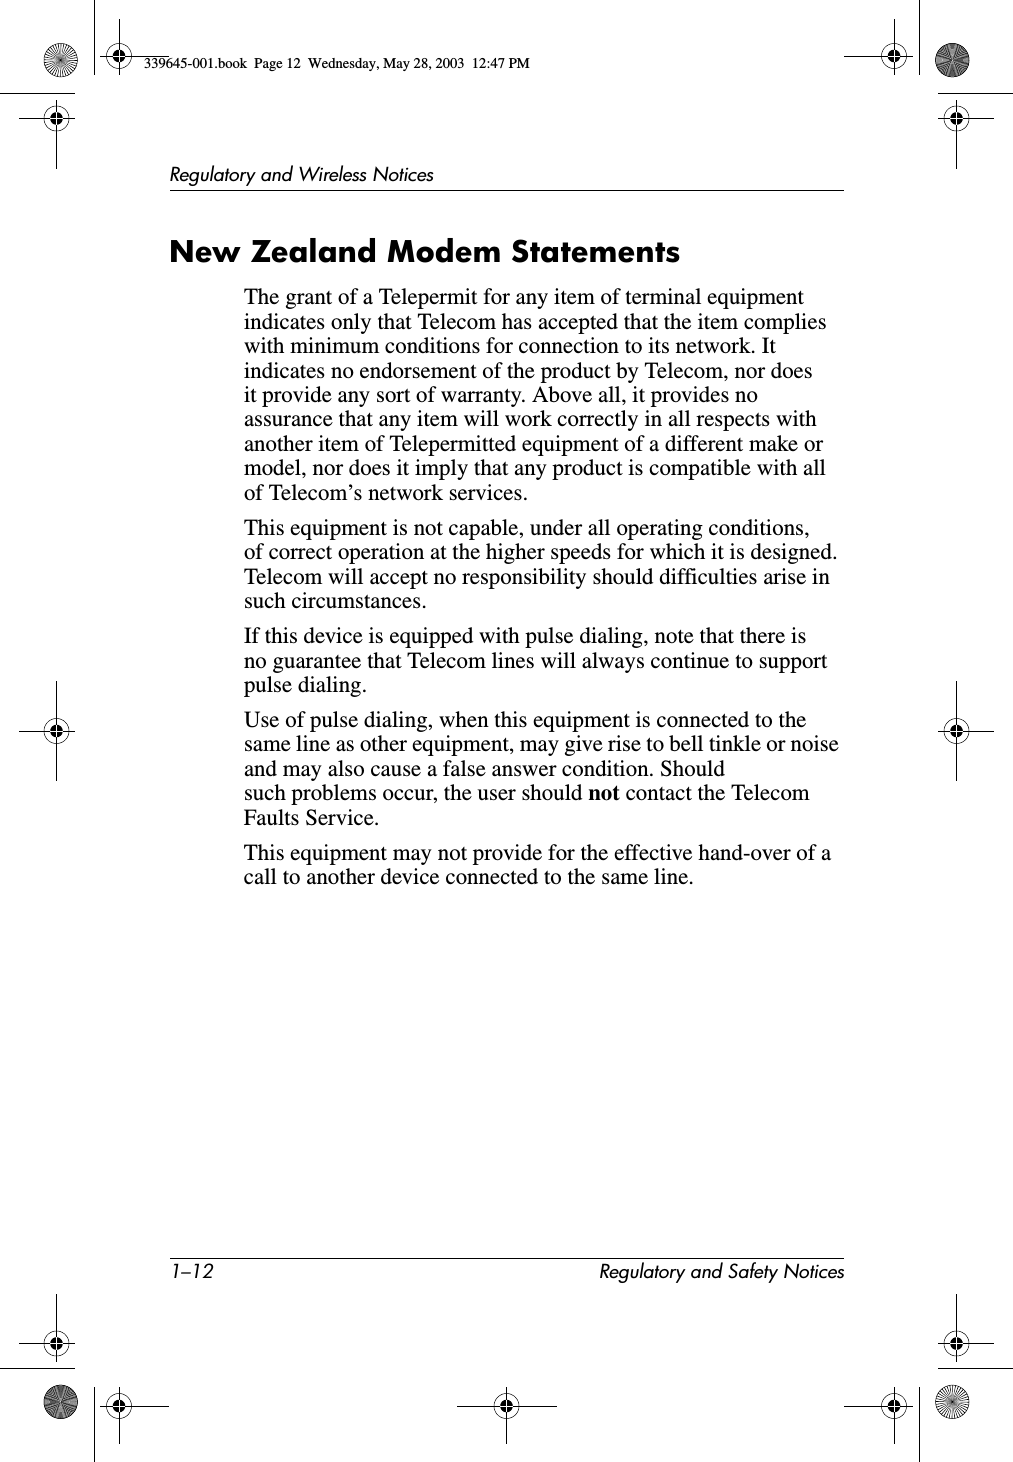 1–12 Regulatory and Safety NoticesRegulatory and Wireless NoticesNew Zealand Modem StatementsThe grant of a Telepermit for any item of terminal equipment indicates only that Telecom has accepted that the item complies with minimum conditions for connection to its network. It indicates no endorsement of the product by Telecom, nor does it provide any sort of warranty. Above all, it provides no assurance that any item will work correctly in all respects with another item of Telepermitted equipment of a different make or model, nor does it imply that any product is compatible with all of Telecom’s network services.This equipment is not capable, under all operating conditions, of correct operation at the higher speeds for which it is designed. Telecom will accept no responsibility should difficulties arise in such circumstances.If this device is equipped with pulse dialing, note that there is no guarantee that Telecom lines will always continue to support pulse dialing.Use of pulse dialing, when this equipment is connected to the same line as other equipment, may give rise to bell tinkle or noise and may also cause a false answer condition. Should such problems occur, the user should not contact the Telecom Faults Service.This equipment may not provide for the effective hand-over of a call to another device connected to the same line.339645-001.book  Page 12  Wednesday, May 28, 2003  12:47 PM